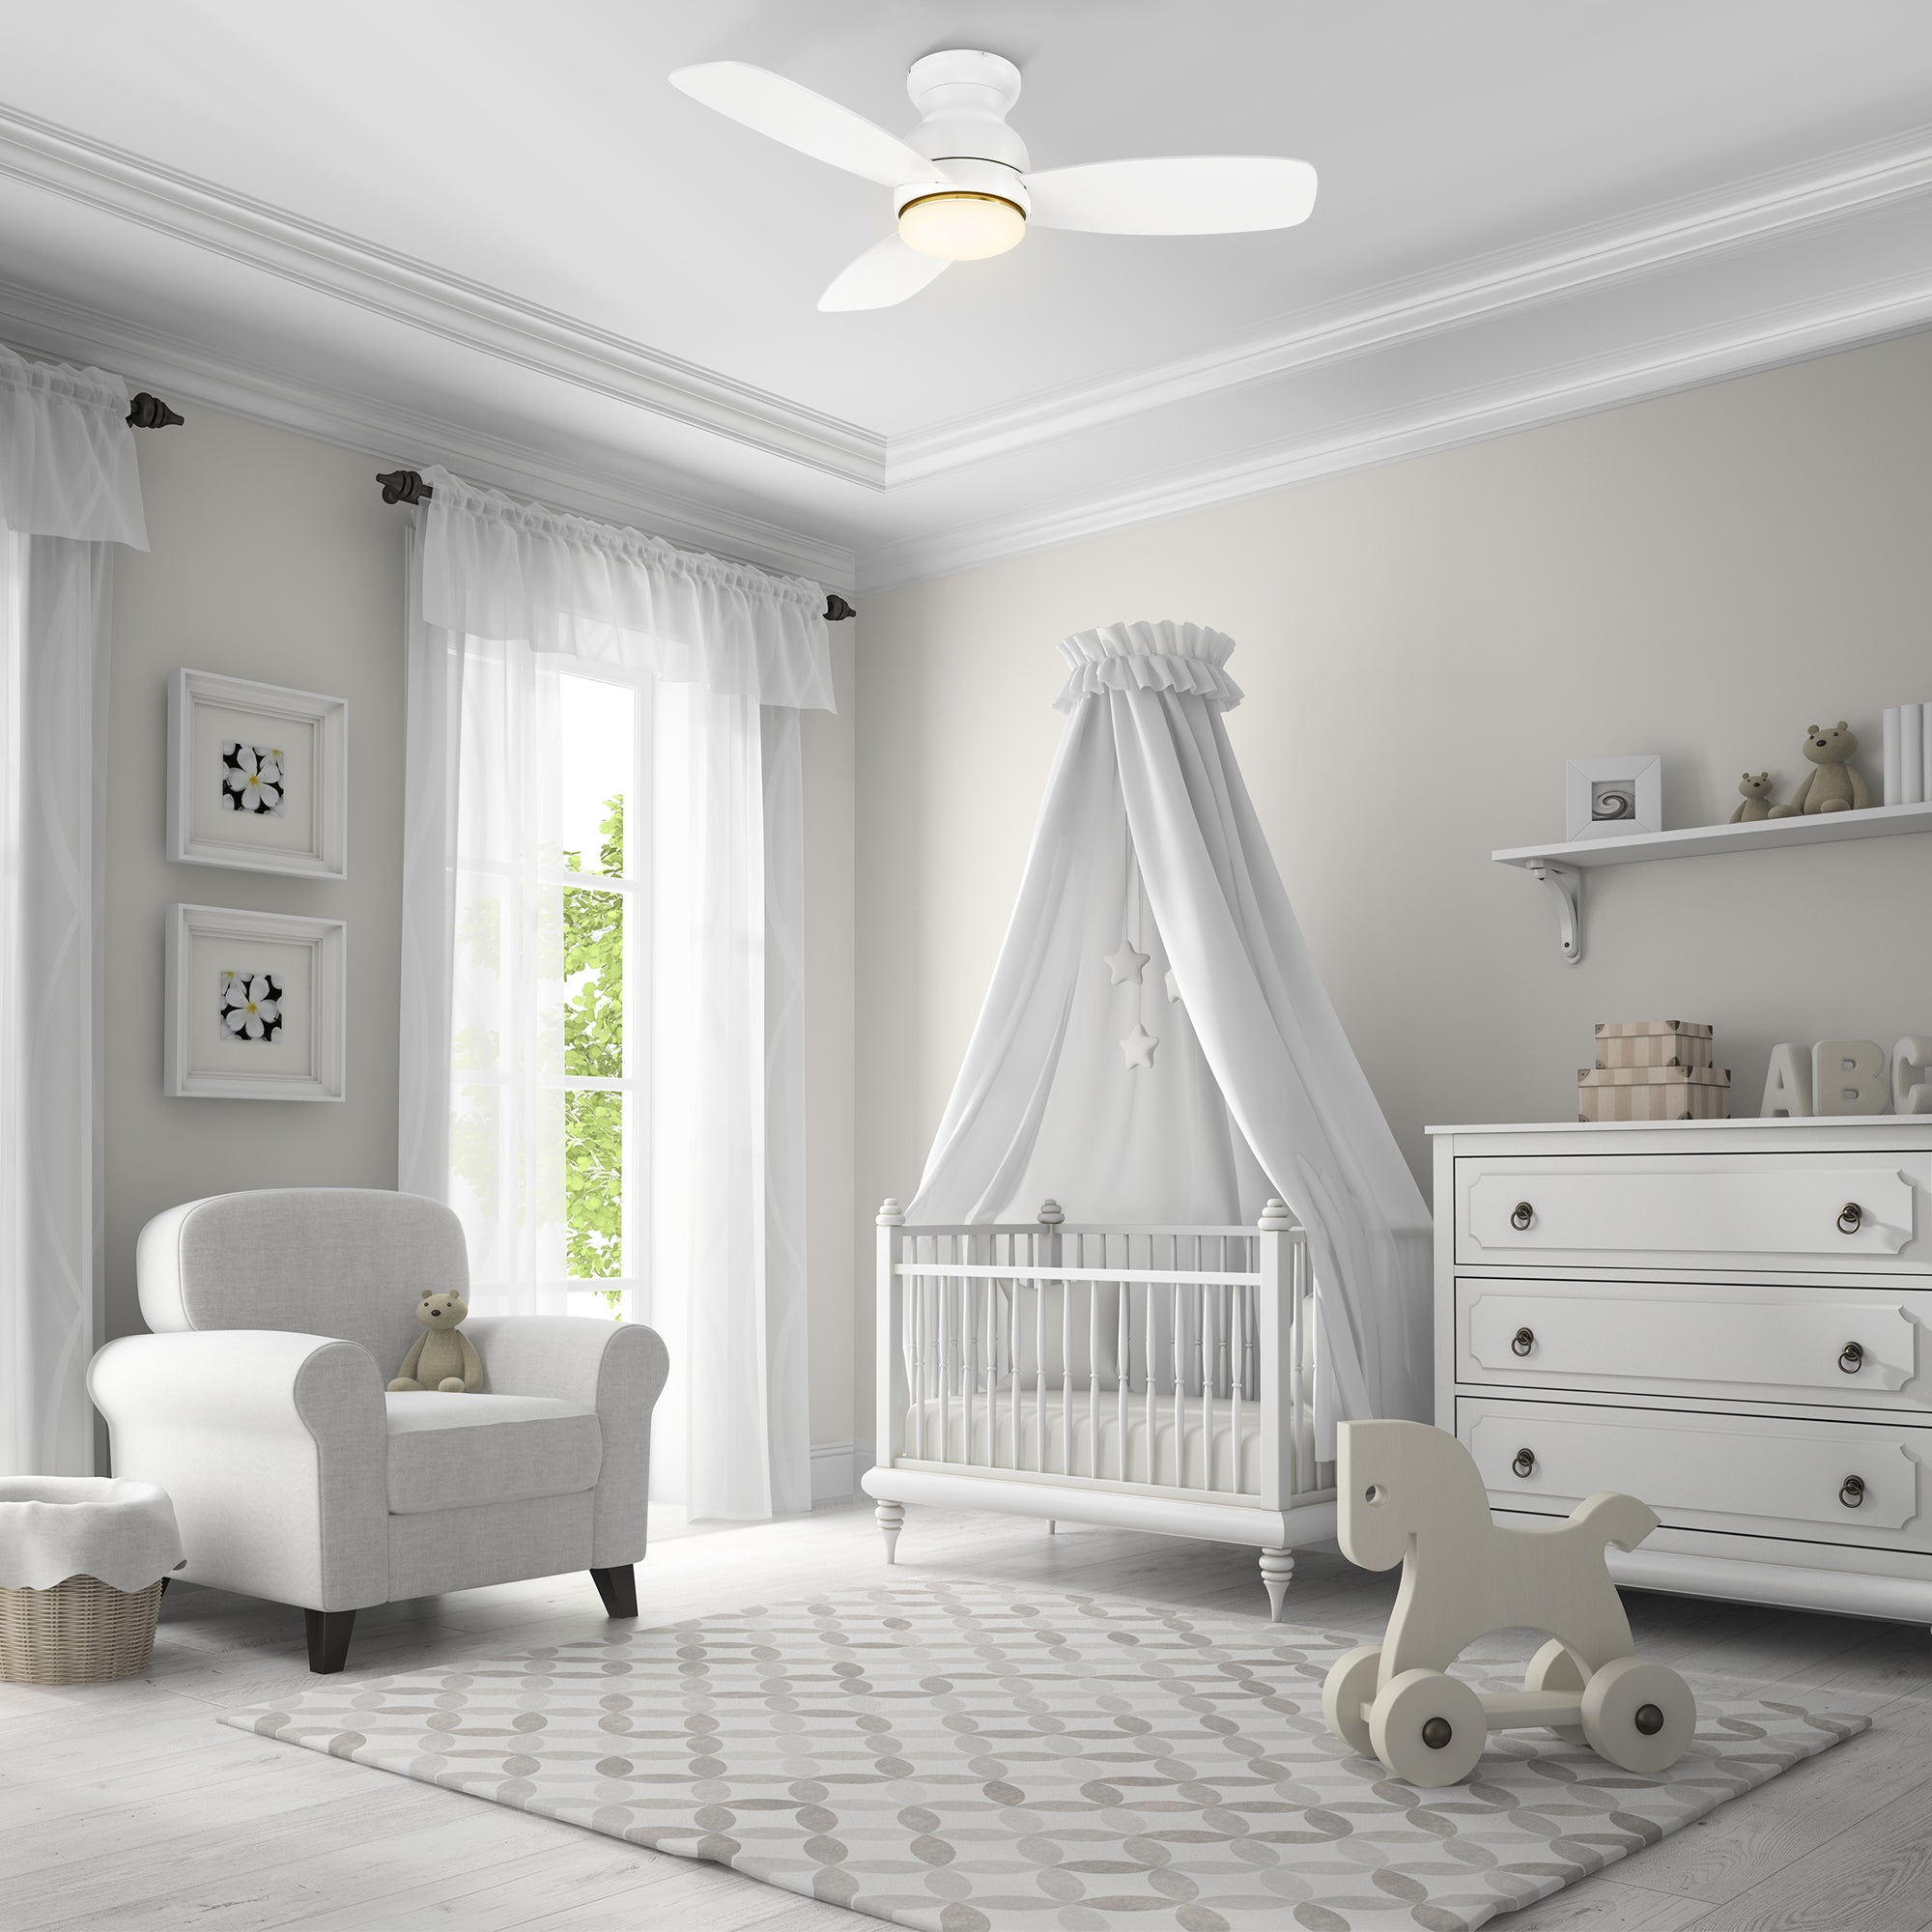 Where To Put Fan In Baby Room